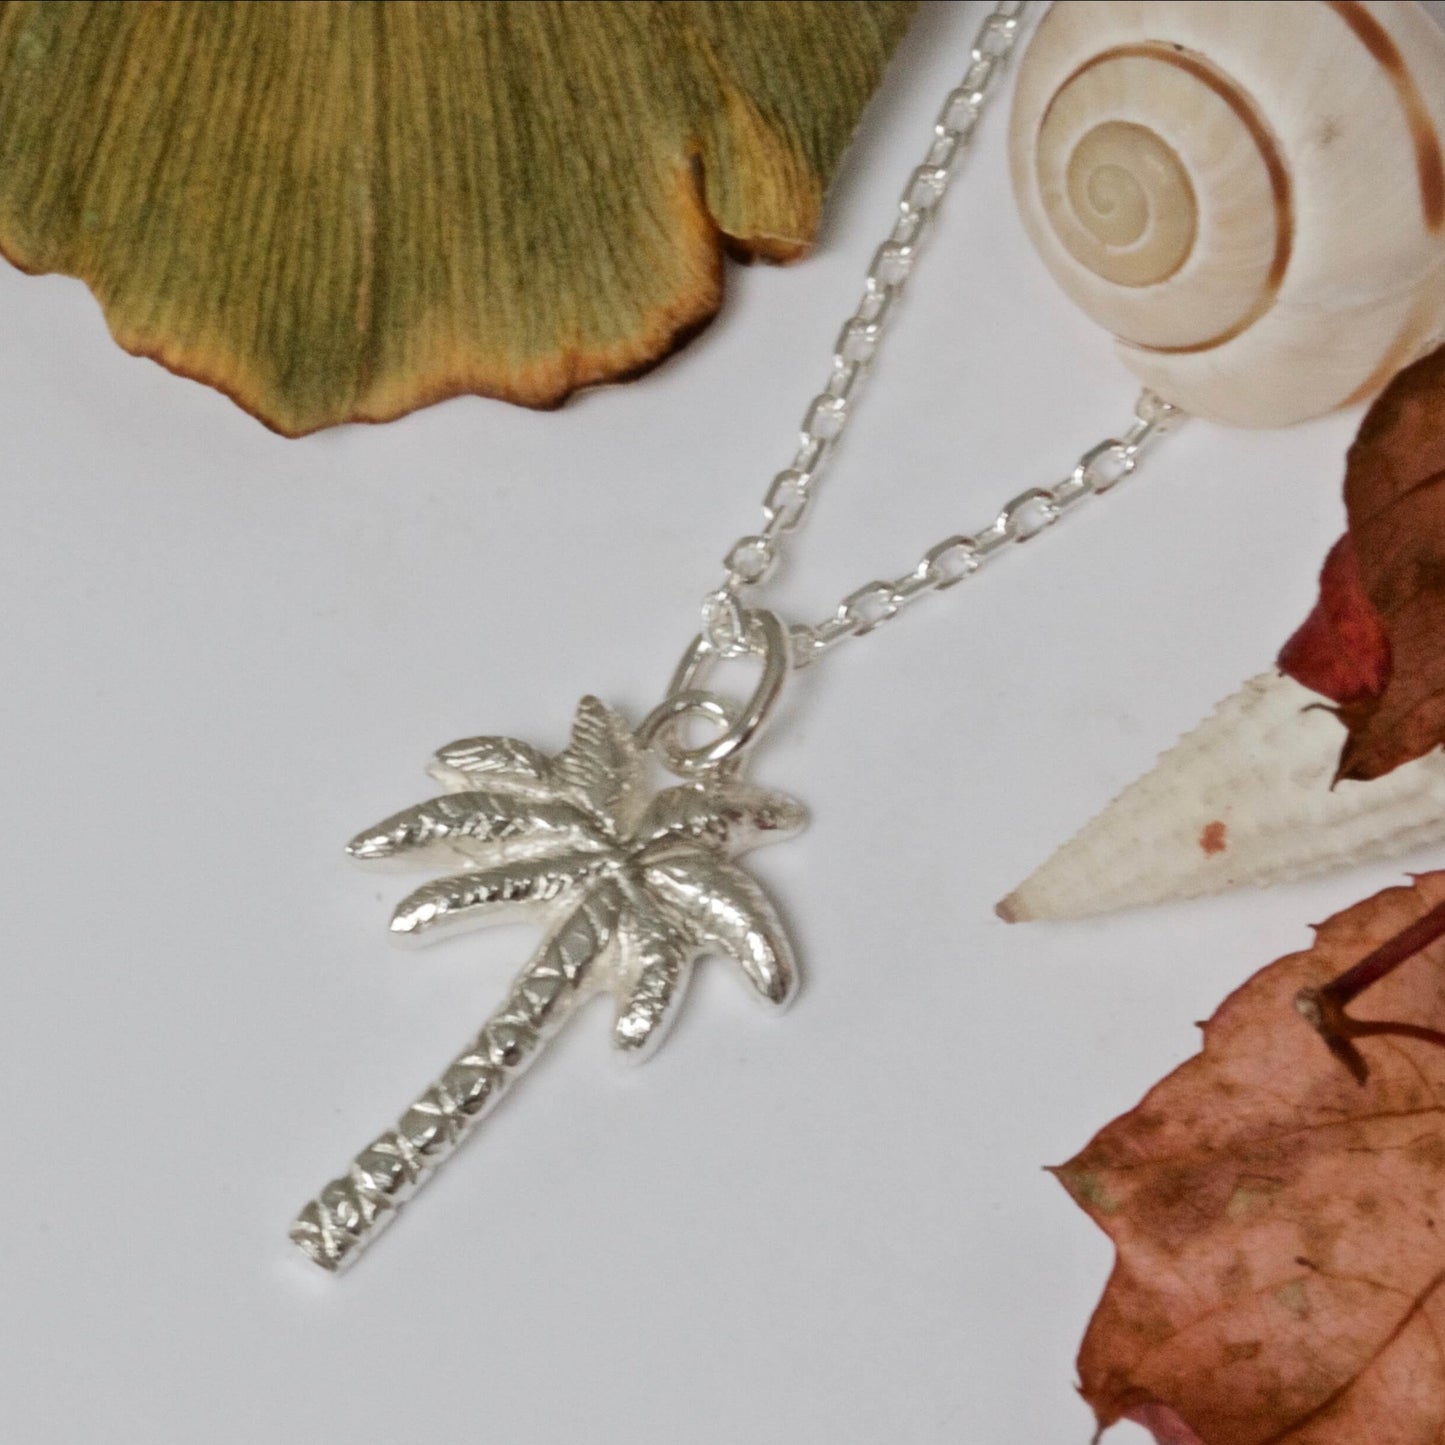 Palm Tree Necklace, Silver Palm Tree Pendant, Tropical Necklace